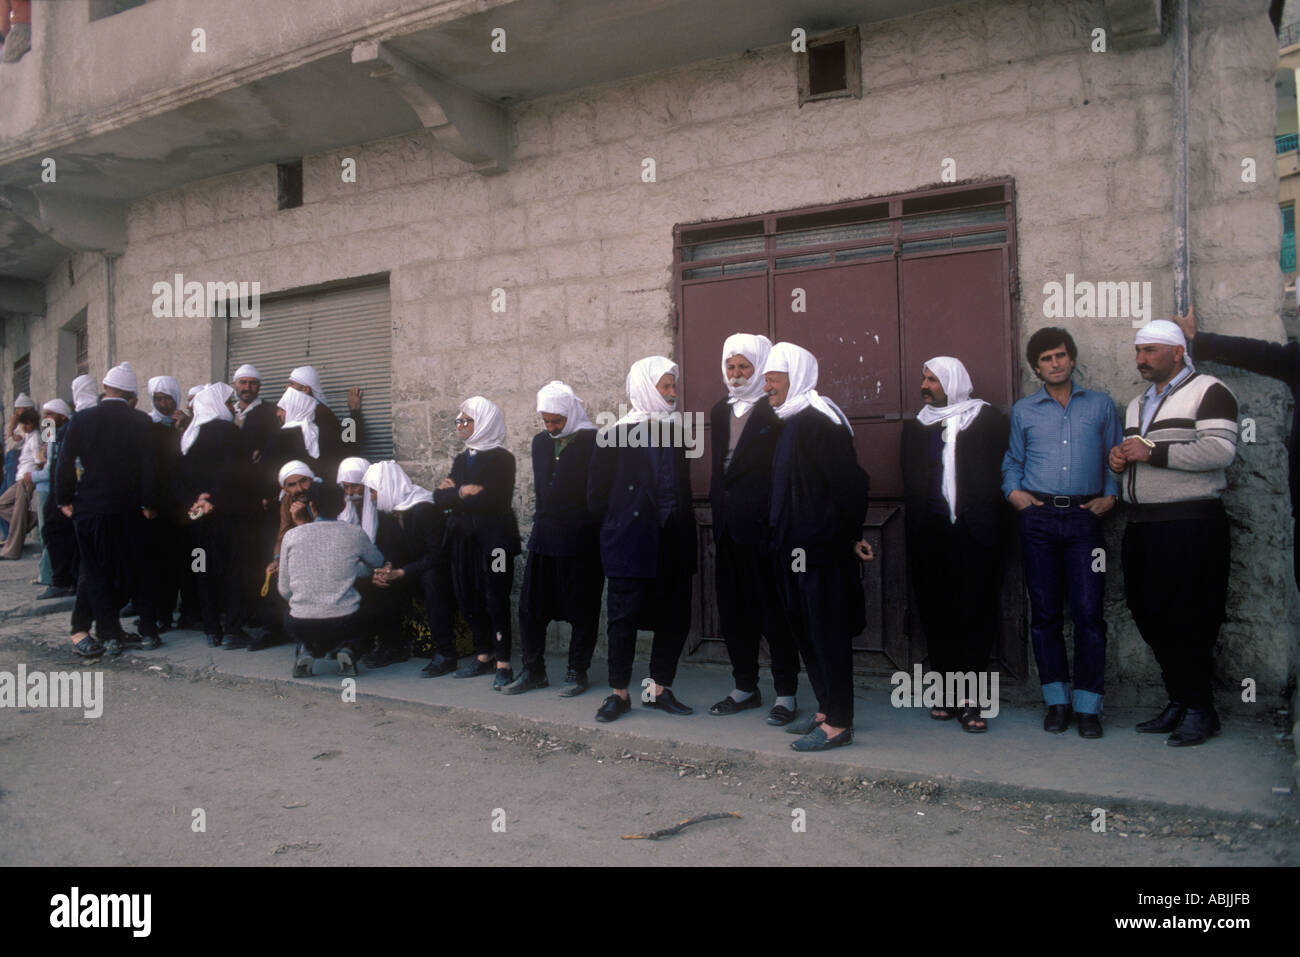 Syrian Druze community people in the Golan Heights Israel One young man in western style clothing amongst many men in traditional clothing 1980s 1982 Stock Photo